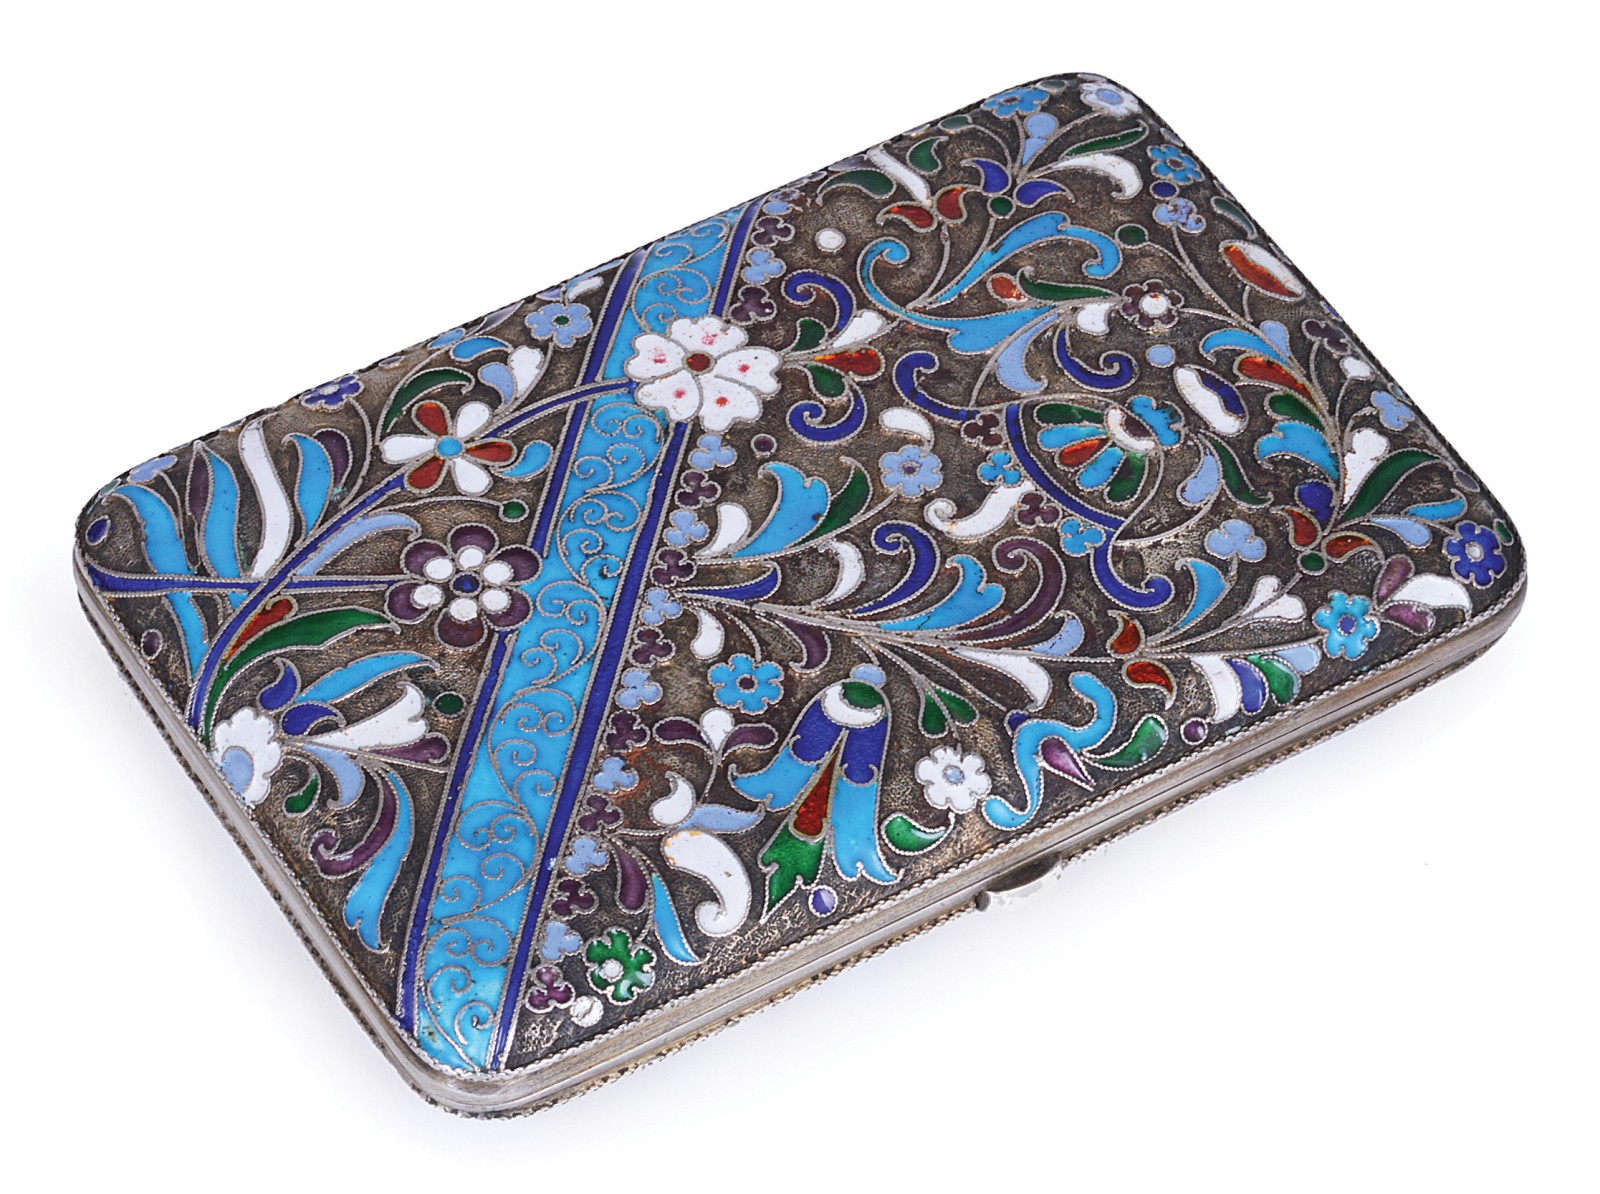 A RUSSIAN SILVER AND CLOISONNE ENAMEL CIGARETTE CASE, MAKER`S MARK DN (IN CYRILLIC), PROBABLY FOR